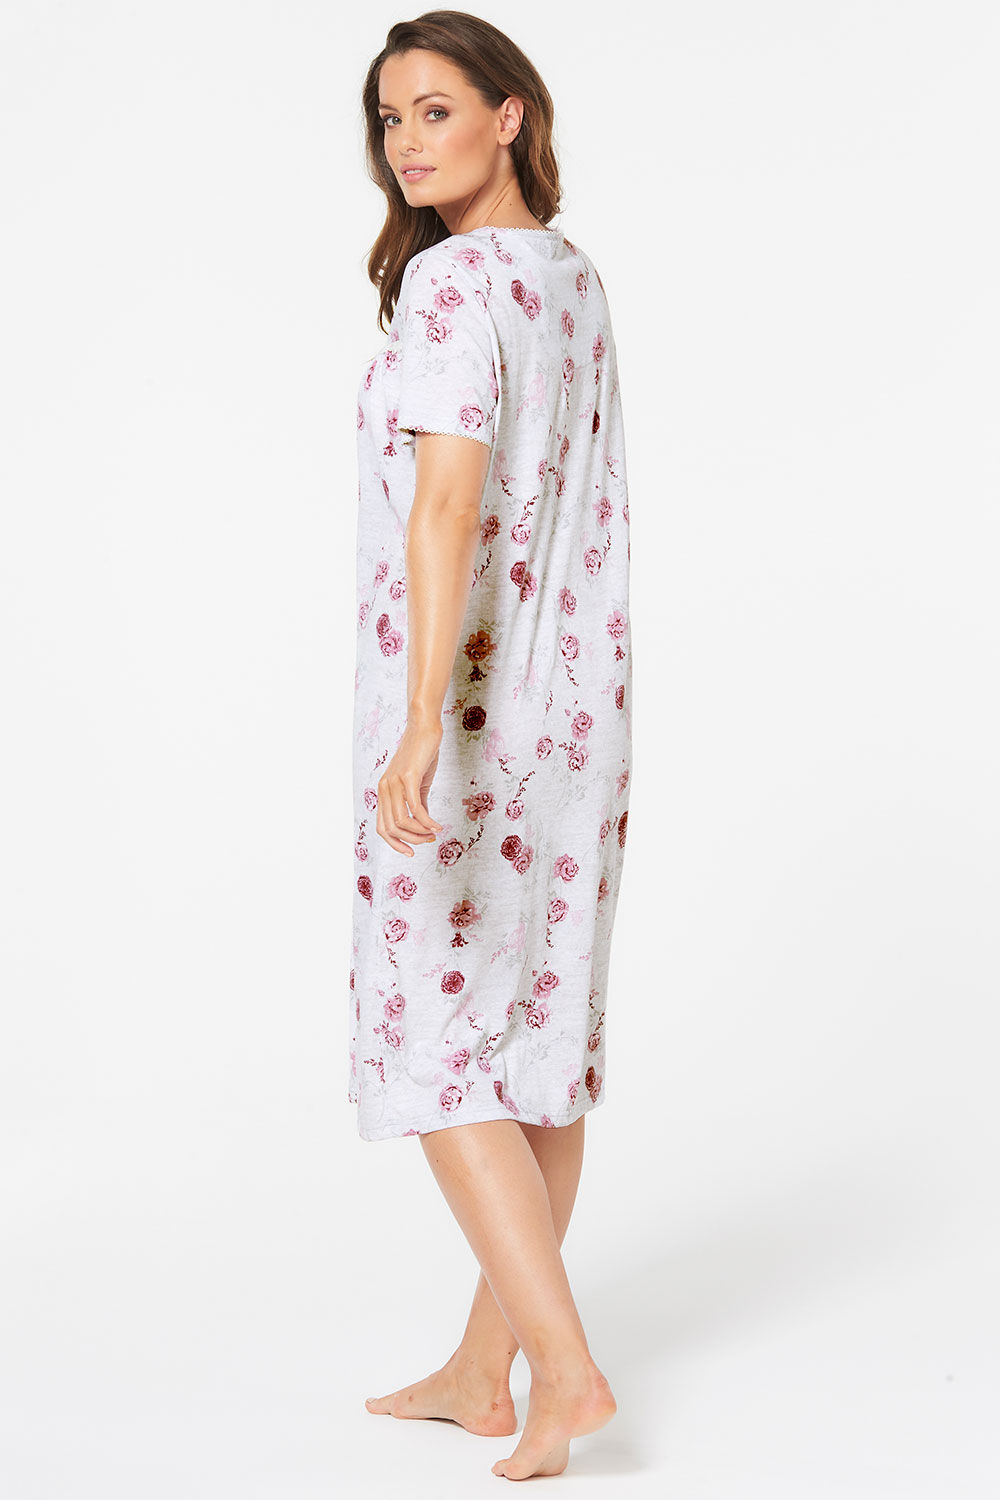 Ladies Button Through Floral Lightweight Nightdress 3 Colours Sizes 10 to 30 